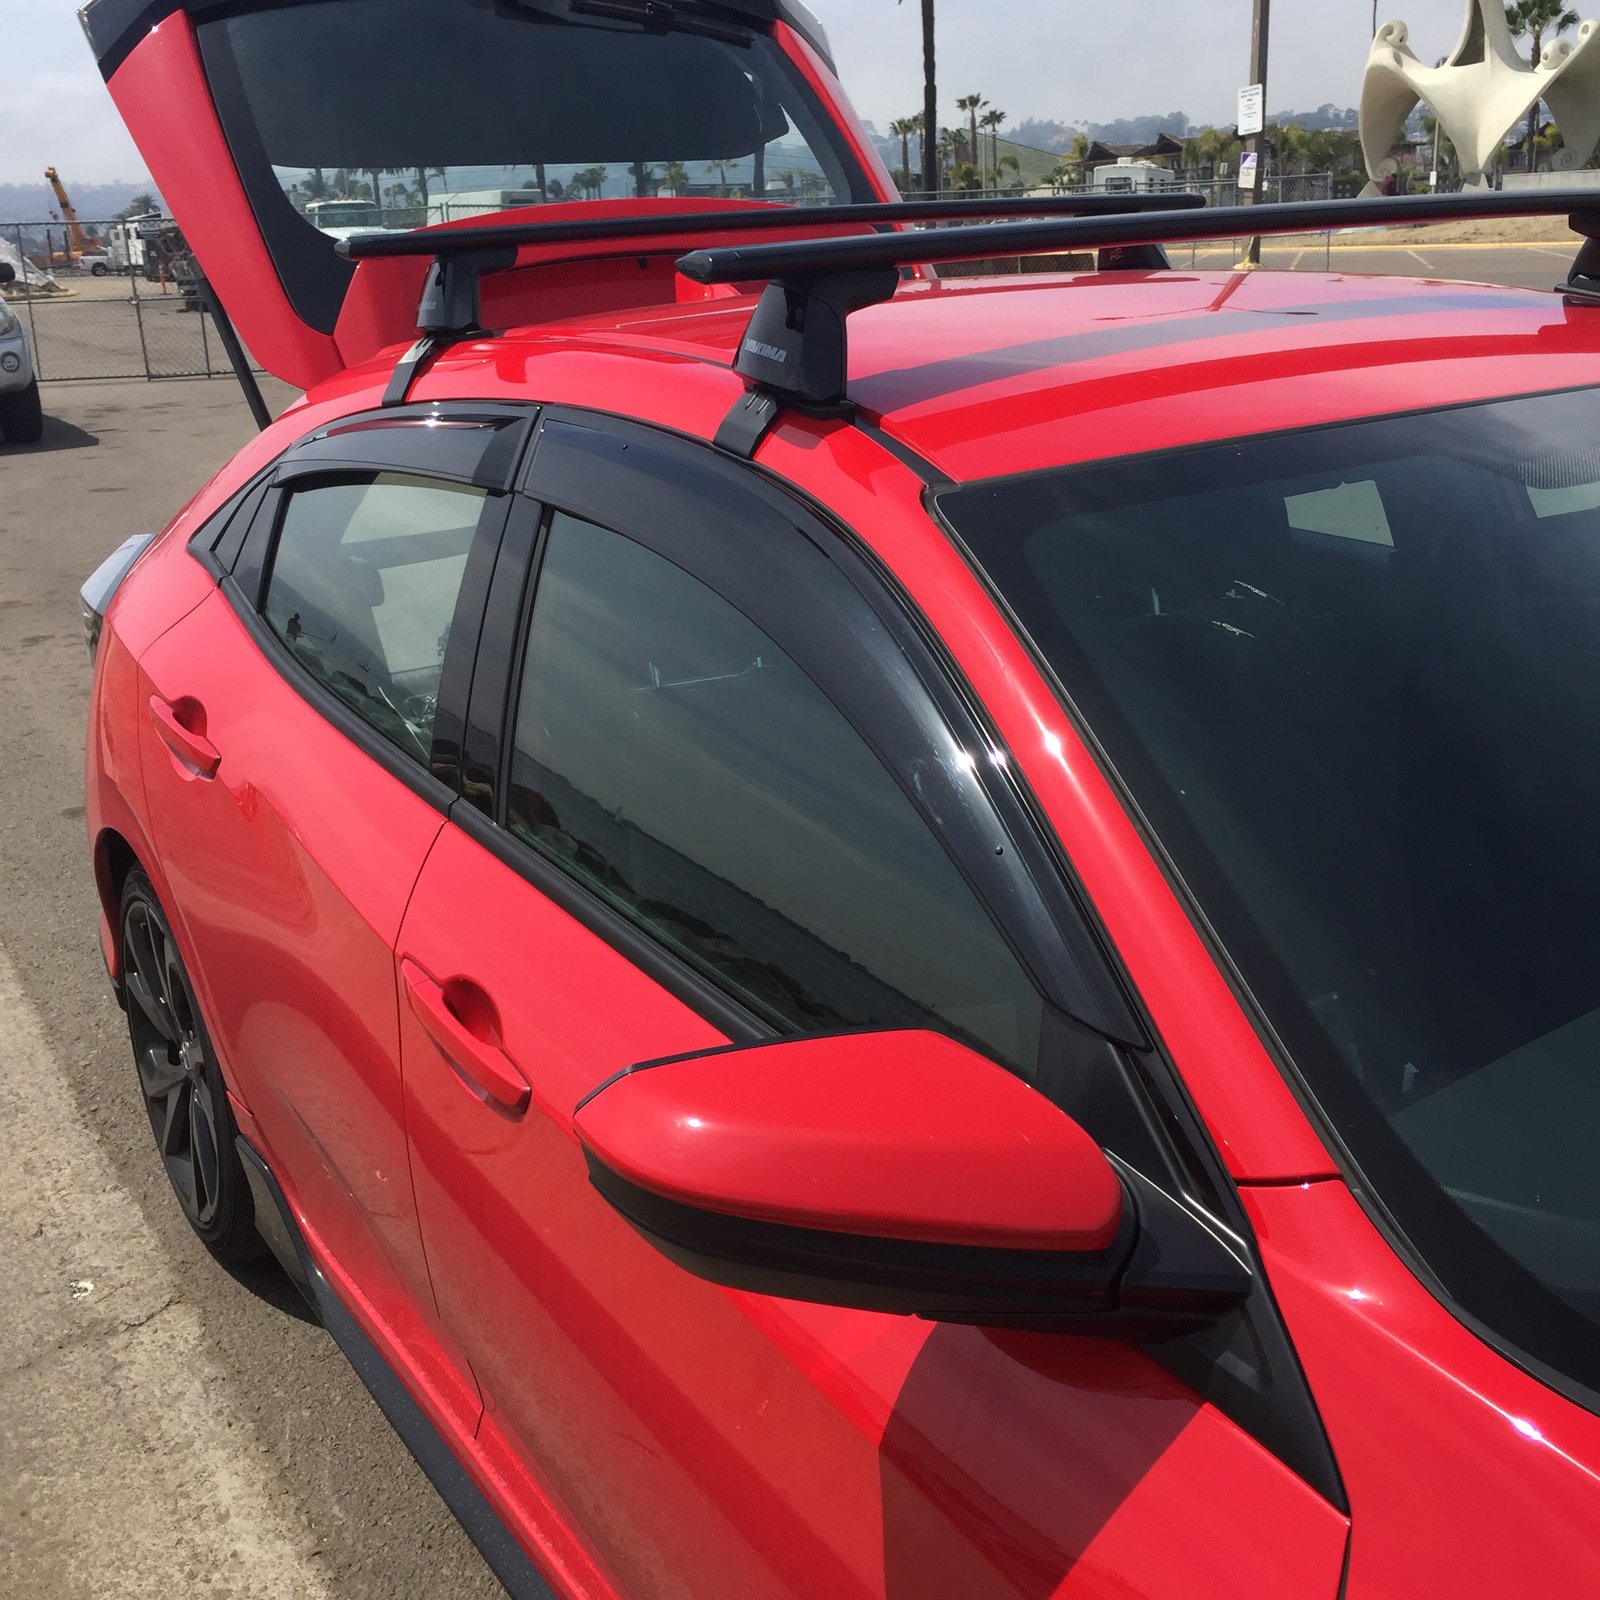 Any hatchback owners get a roof rack yet? Page 2 2016+ Honda Civic